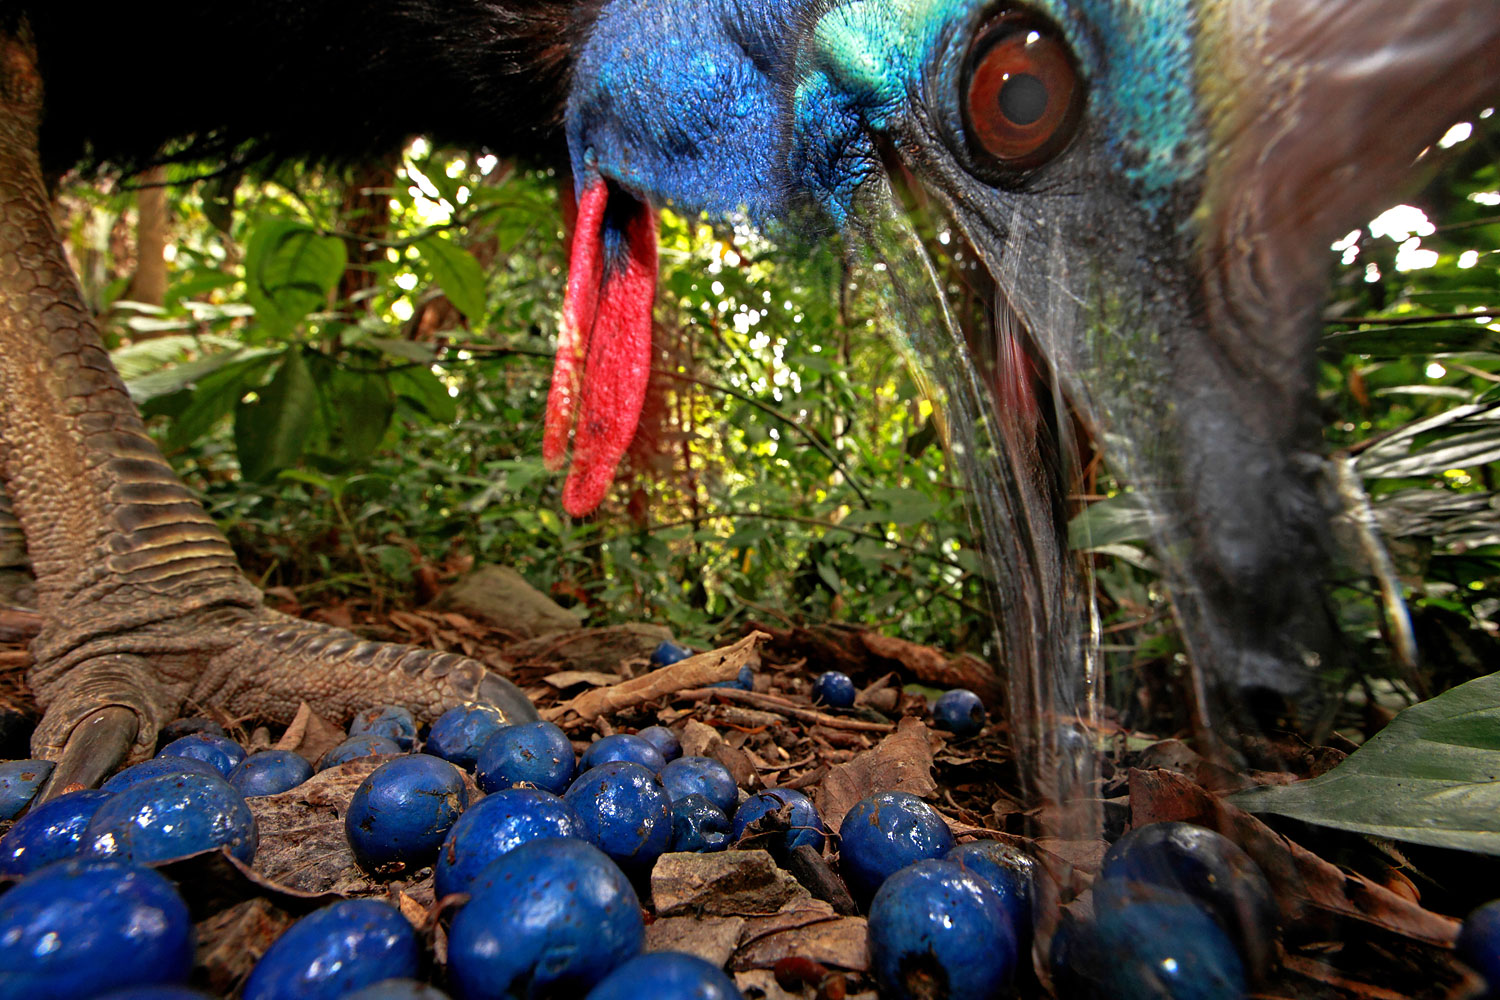 1st Prize Nature Single. Christian Ziegler, Germany. 16 November 2012, Black Mountain Road, Australia. The endangered Southern Cassowary feeds on the fruit of the Blue Quandang tree. Cassowaries are a keystone species in northern Australian rainforests because of their ability to carry so many big seeds such long distances.